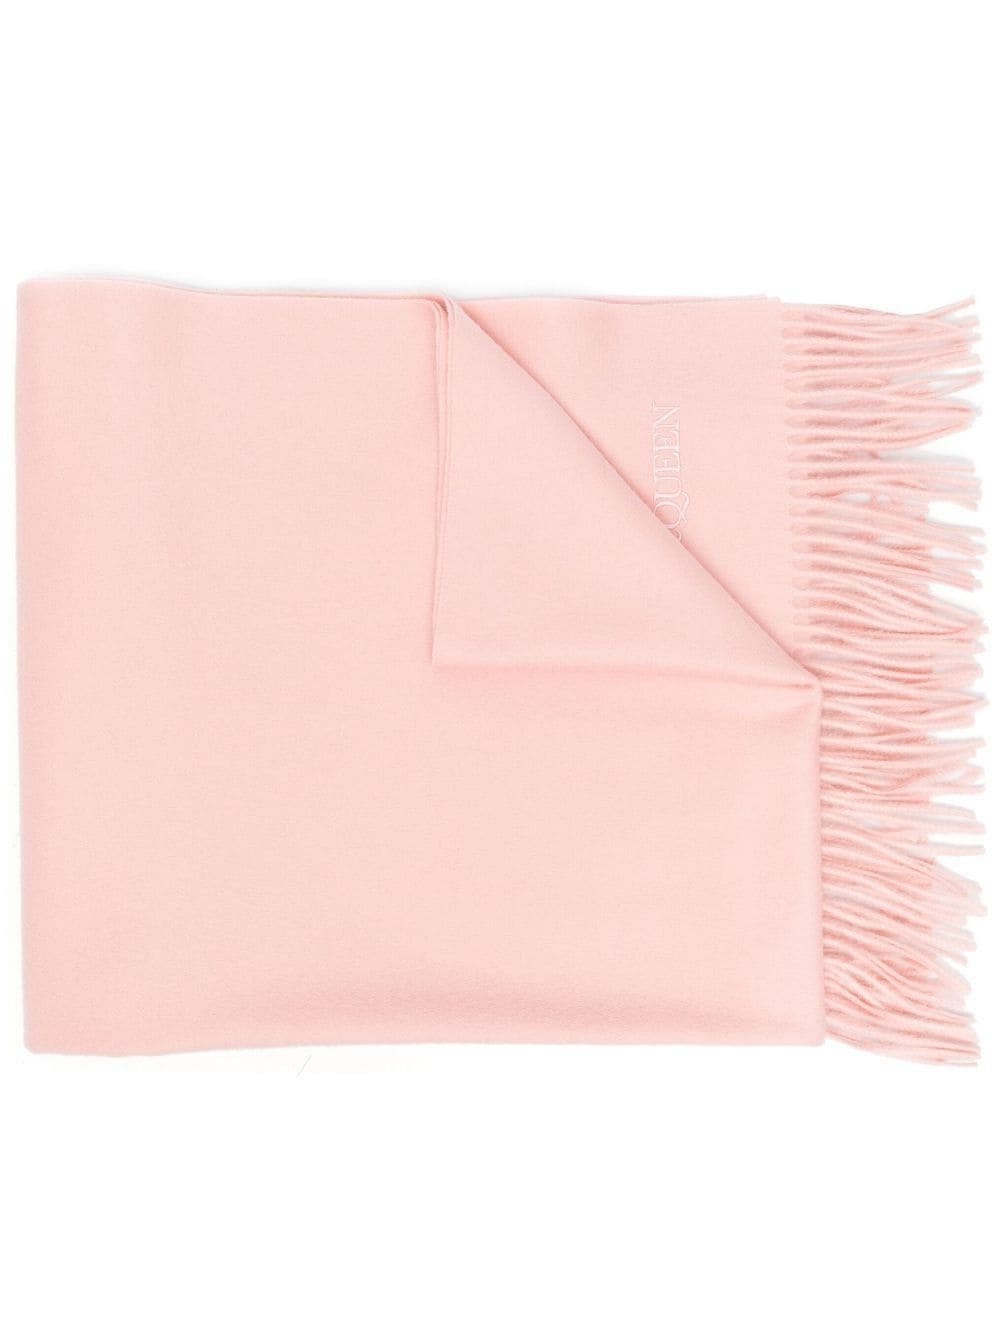 ALEXANDER MCQUEEN PINK SCARF WITH EMBROIDERED LOGO AND FRINGES